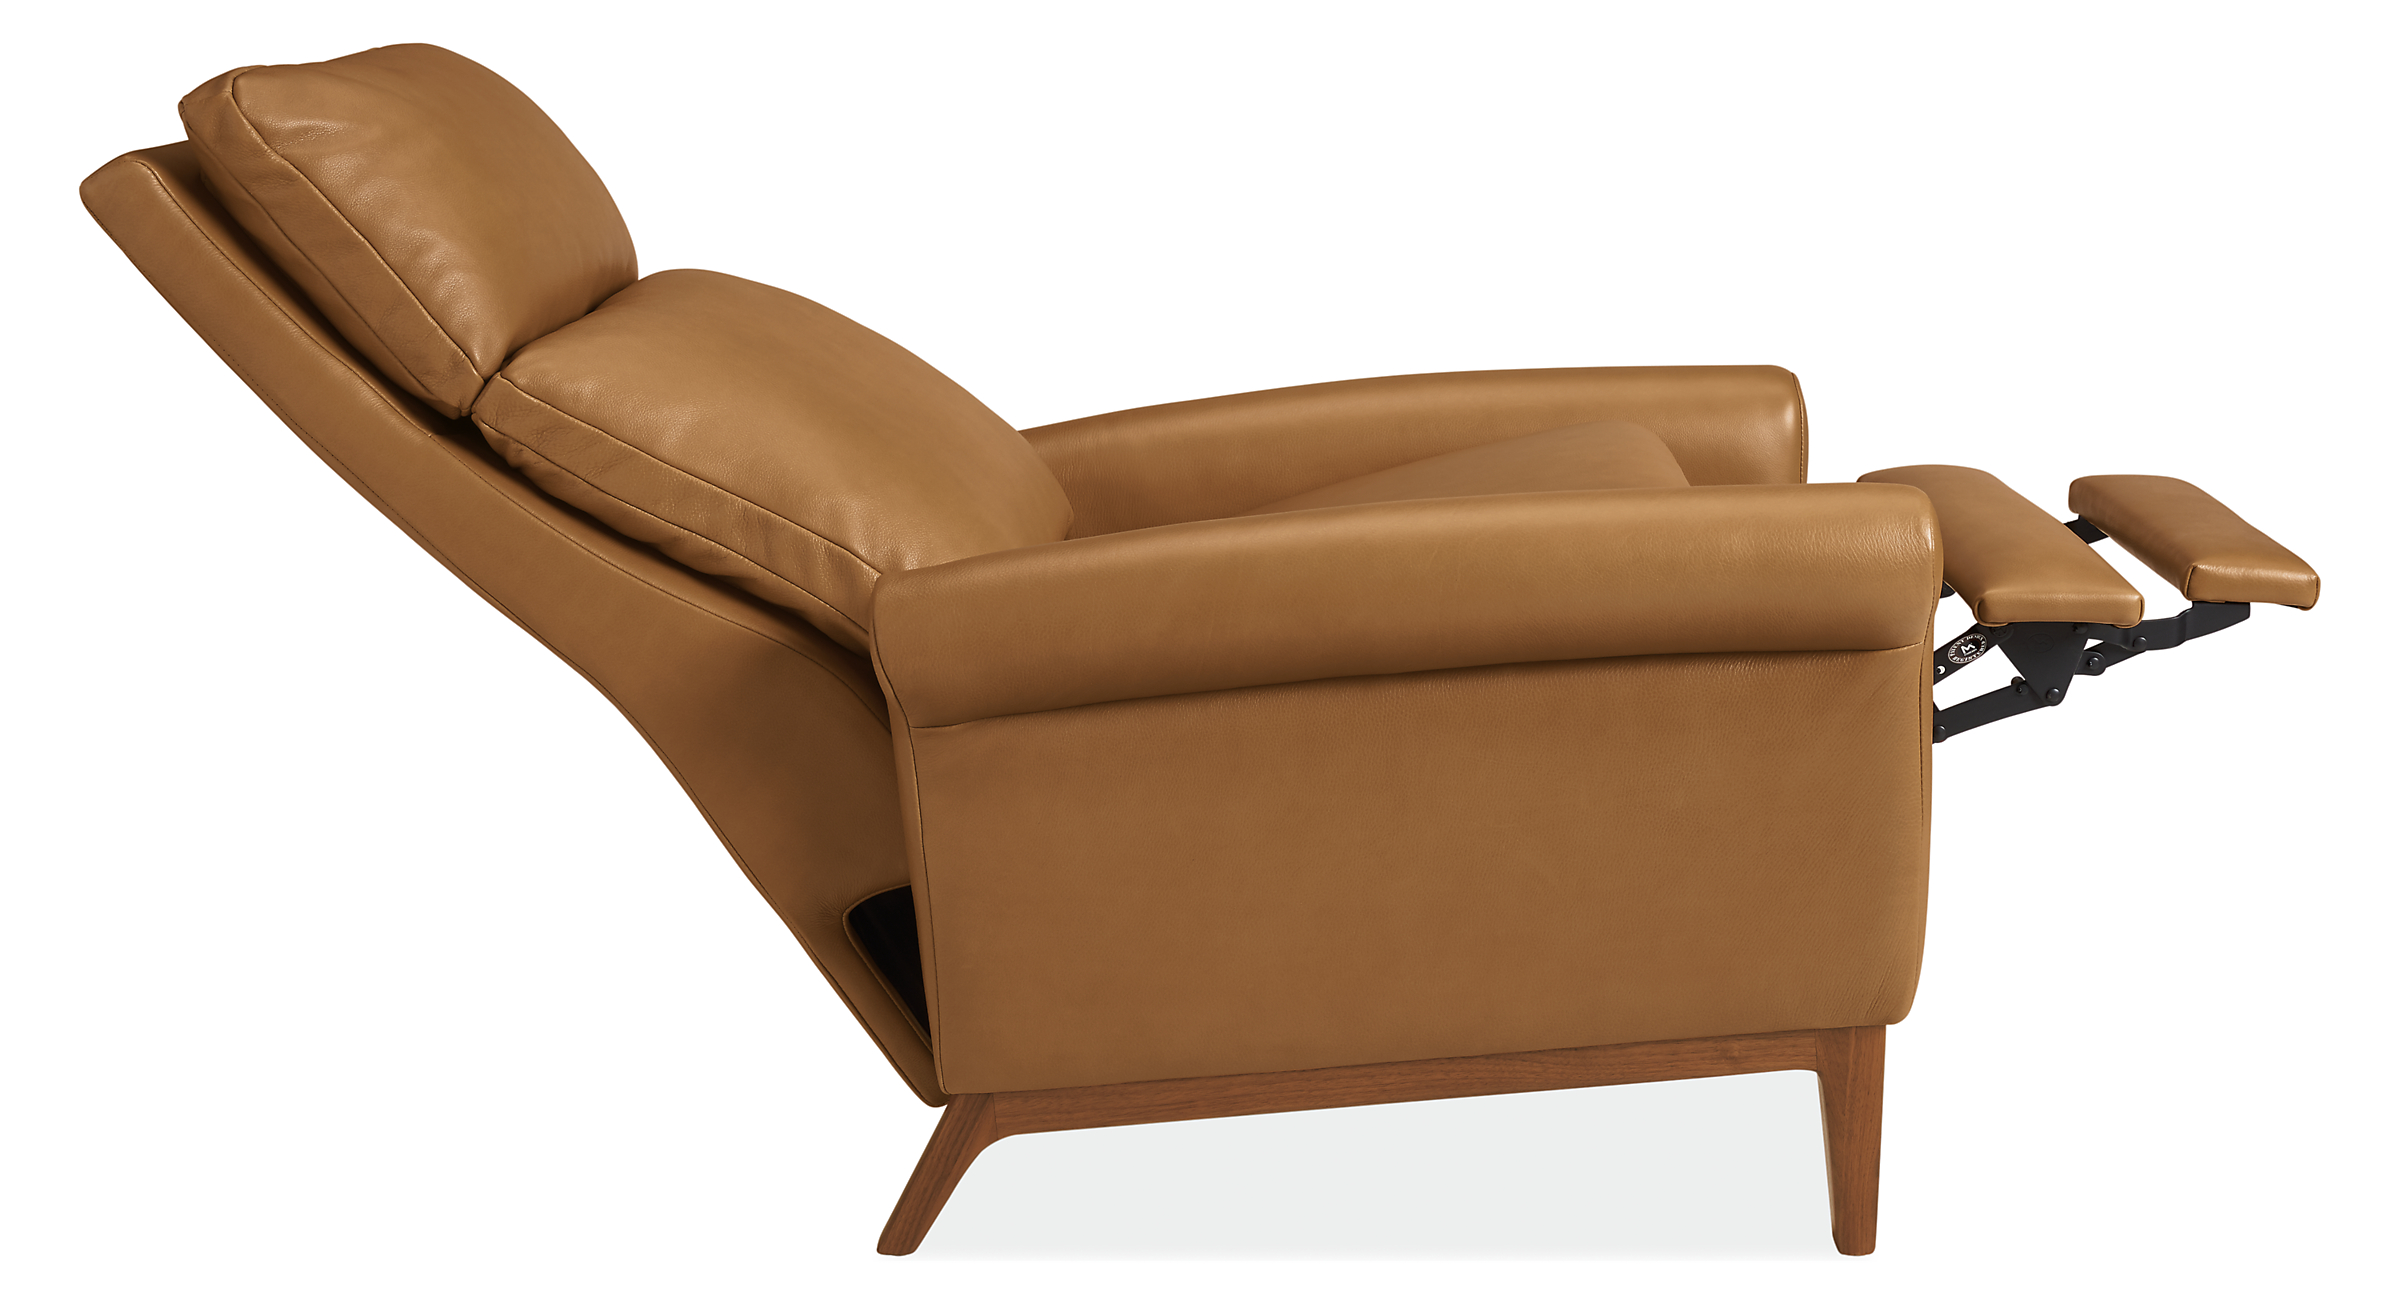 Open detail of Wynton Select Recliner Wood Base in Lecco Leather- Rolled Arm.